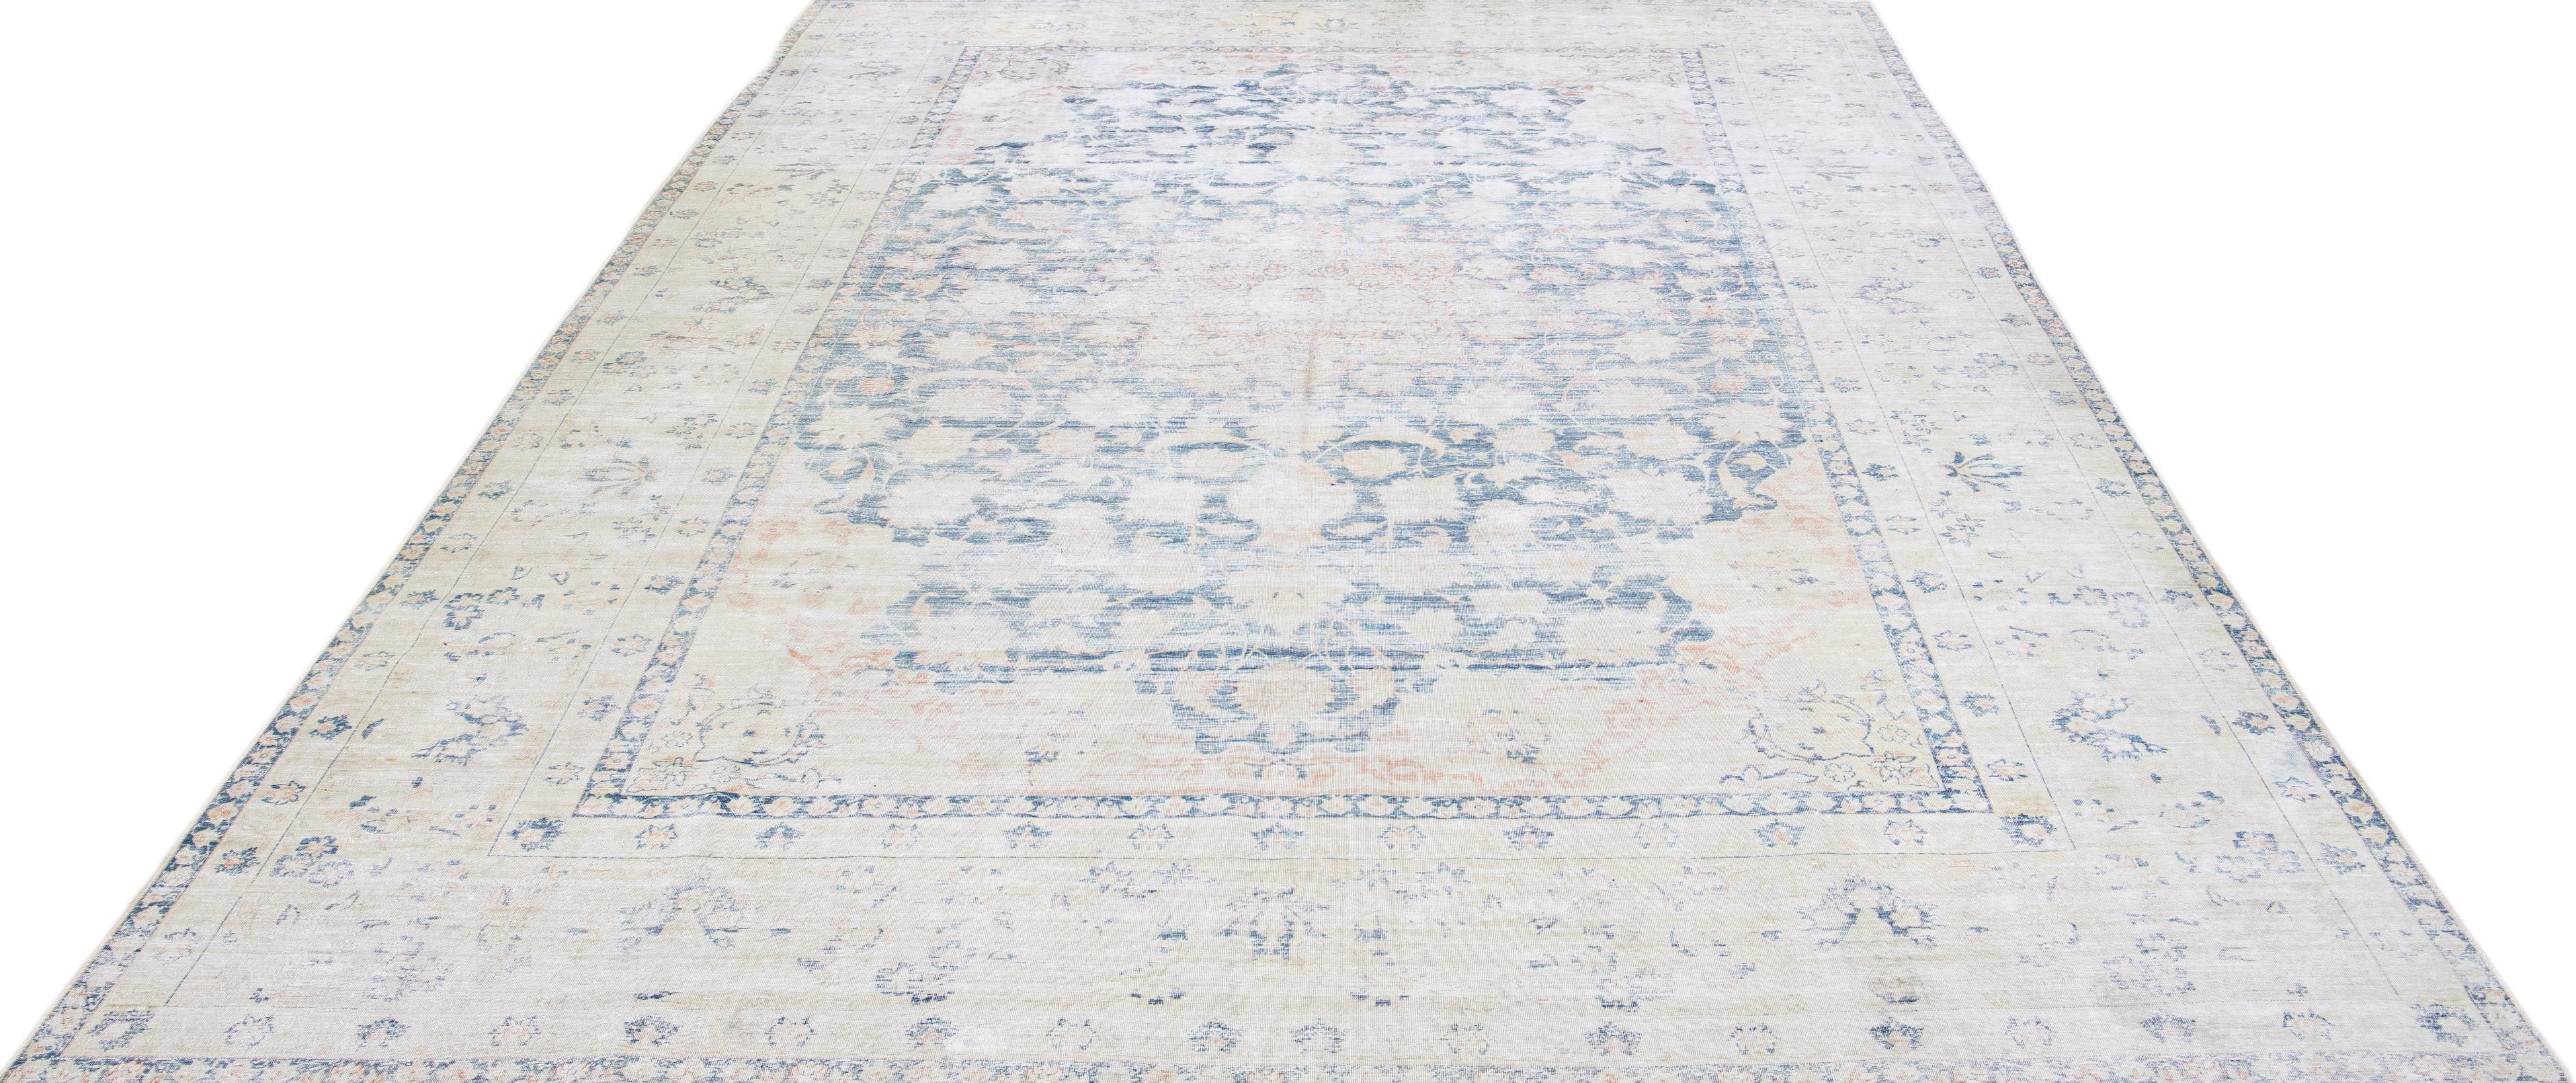 Beautiful antique Tabriz hand-knotted wool rug with a blue color field. This Persian rug has a beige frame with rust accents in a gorgeous all-over medallion design.

This rug measures: 9'8